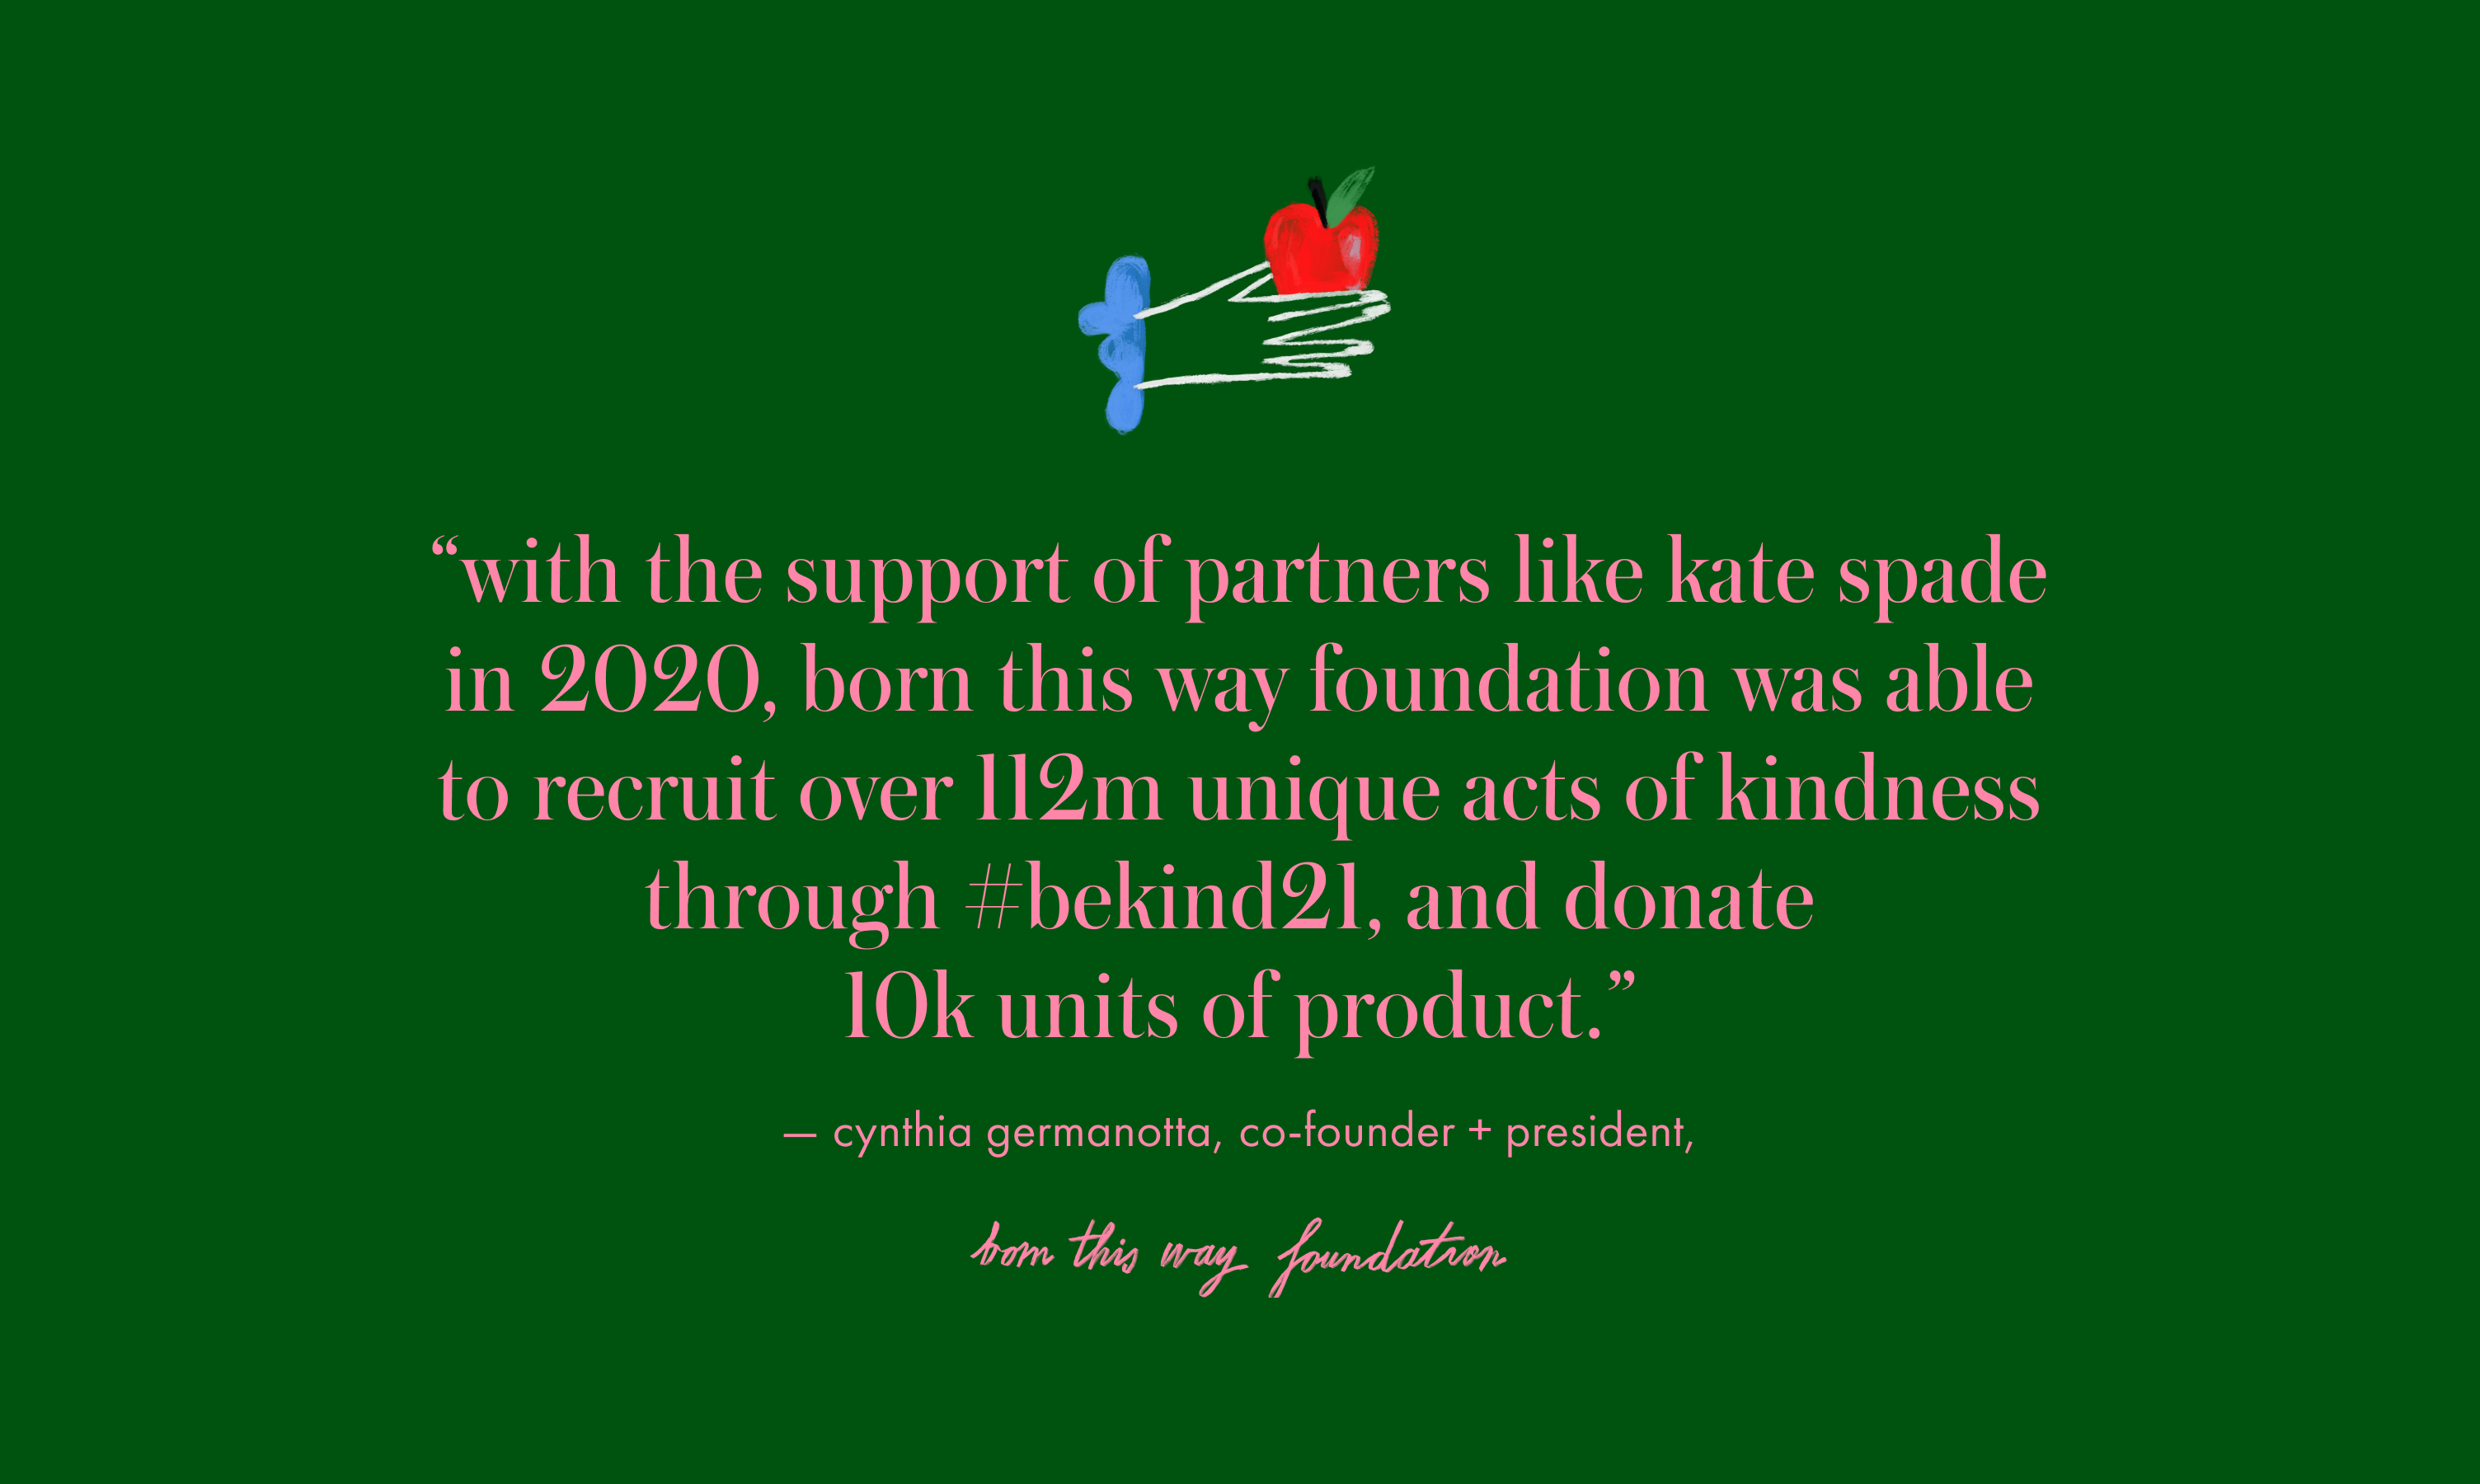 with the support of partners like kate spade in 2020, born this way
												foundation was able to
												recruit over 112m unique acts of kindness through #bekind21, and donate
												10k units of product.
												— cynthia germanotta, co-founder + president,